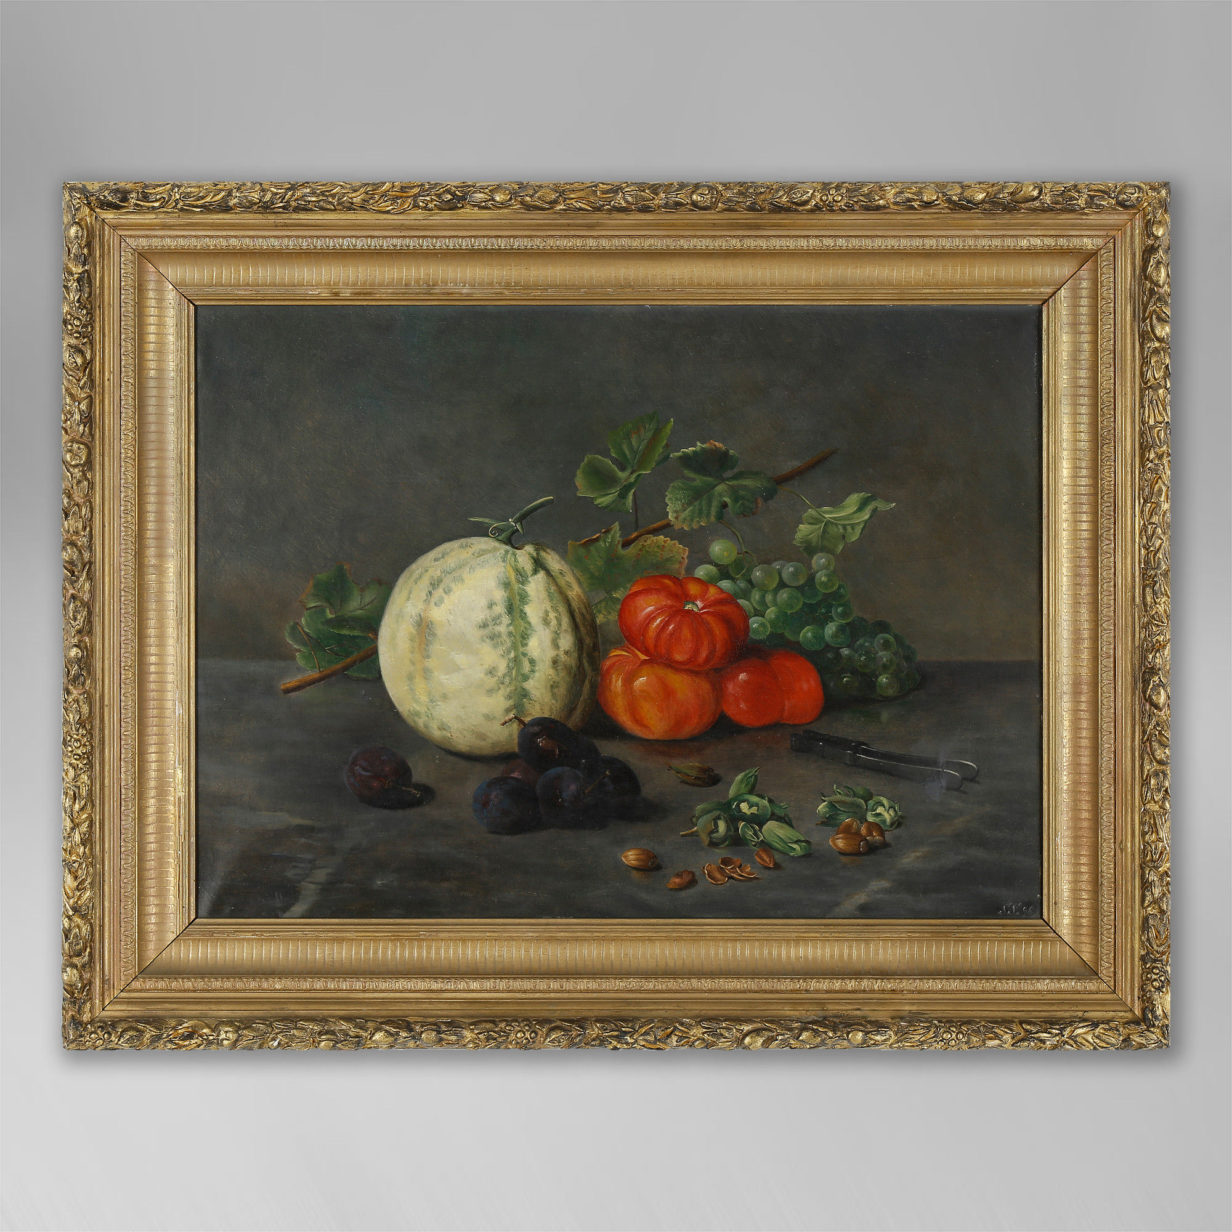 A Late 19th Century Still Life of Fruit